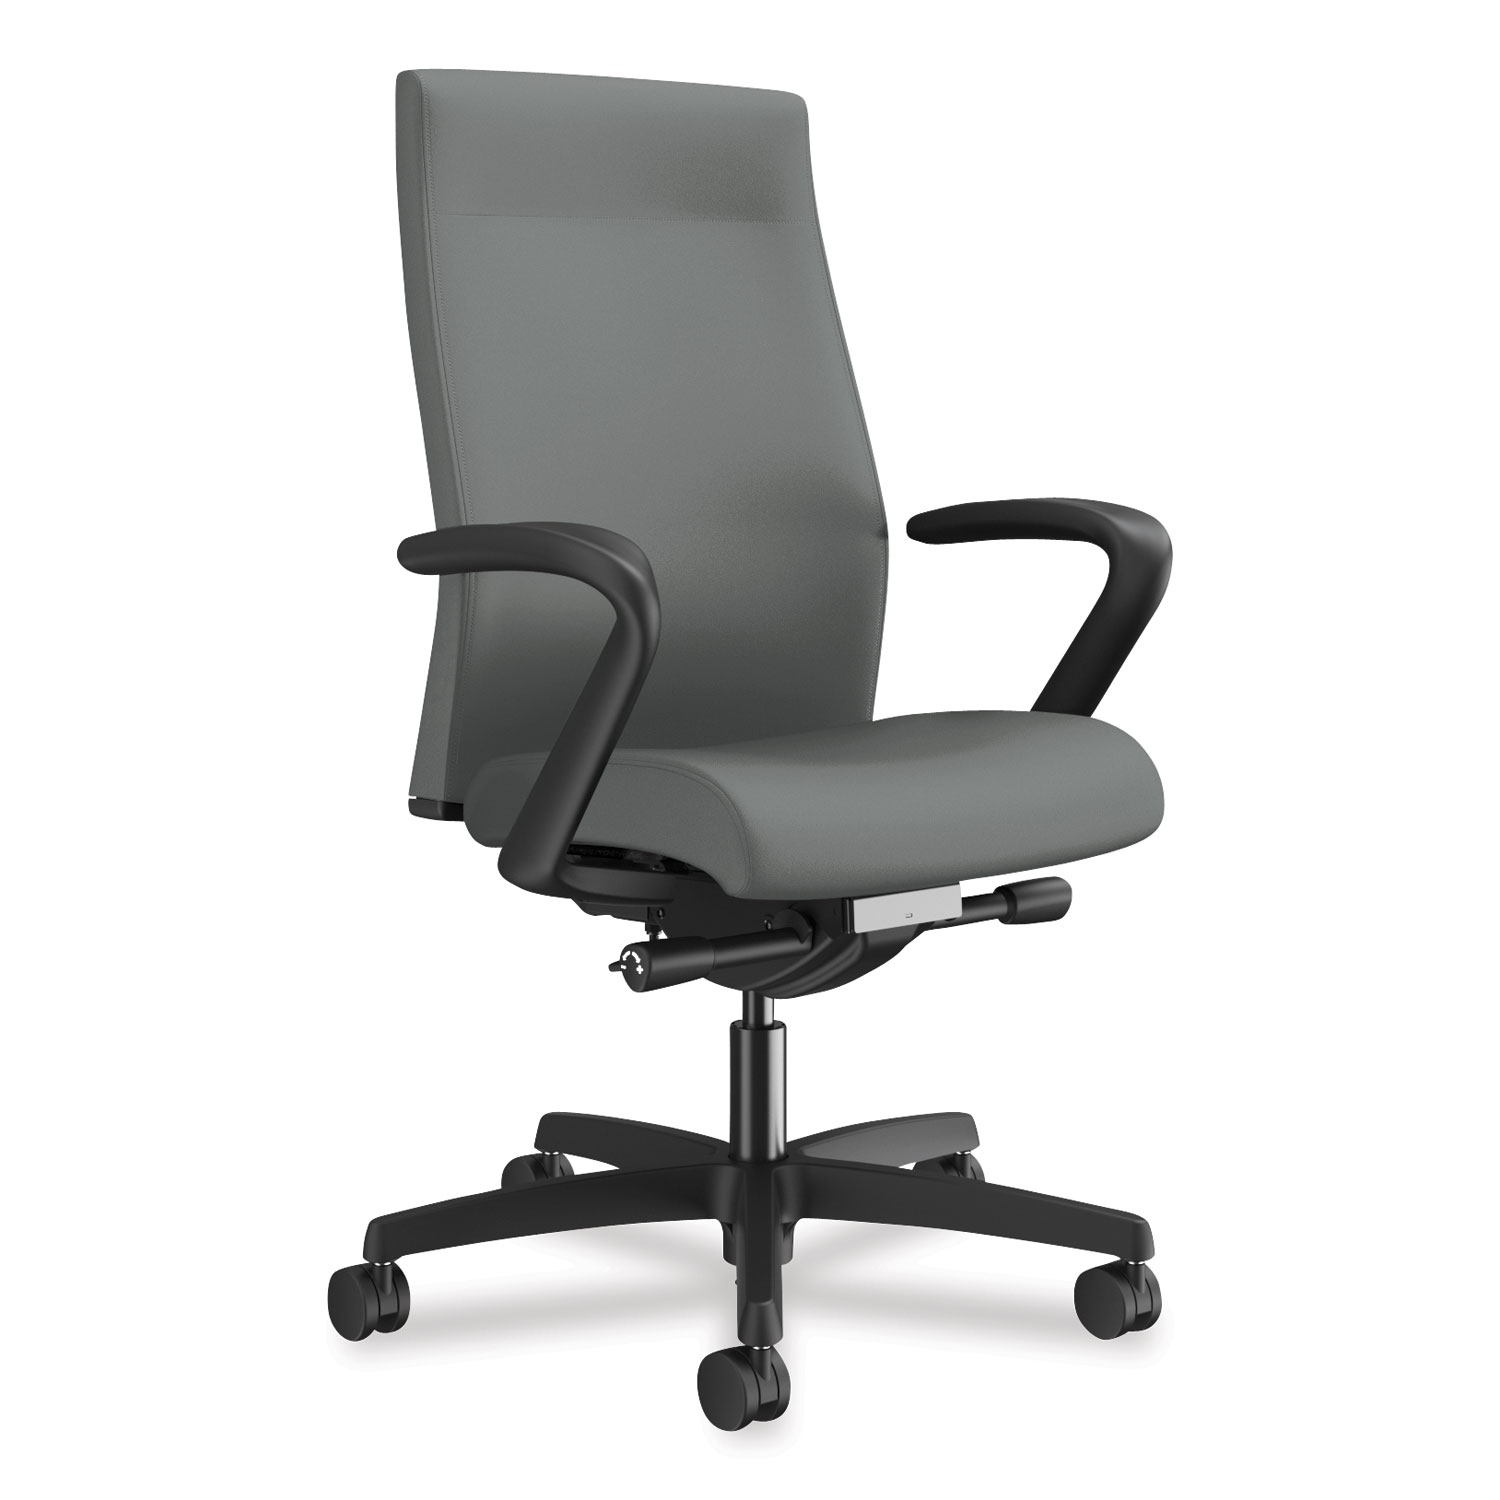  HON HONI2UL2FC22TK Ignition 2.0 Upholstered Mid-Back Task Chair, Supports up to 300 lbs., Frost Seat, Frost Back, Black Base (HONI2UL2FC22TK) 